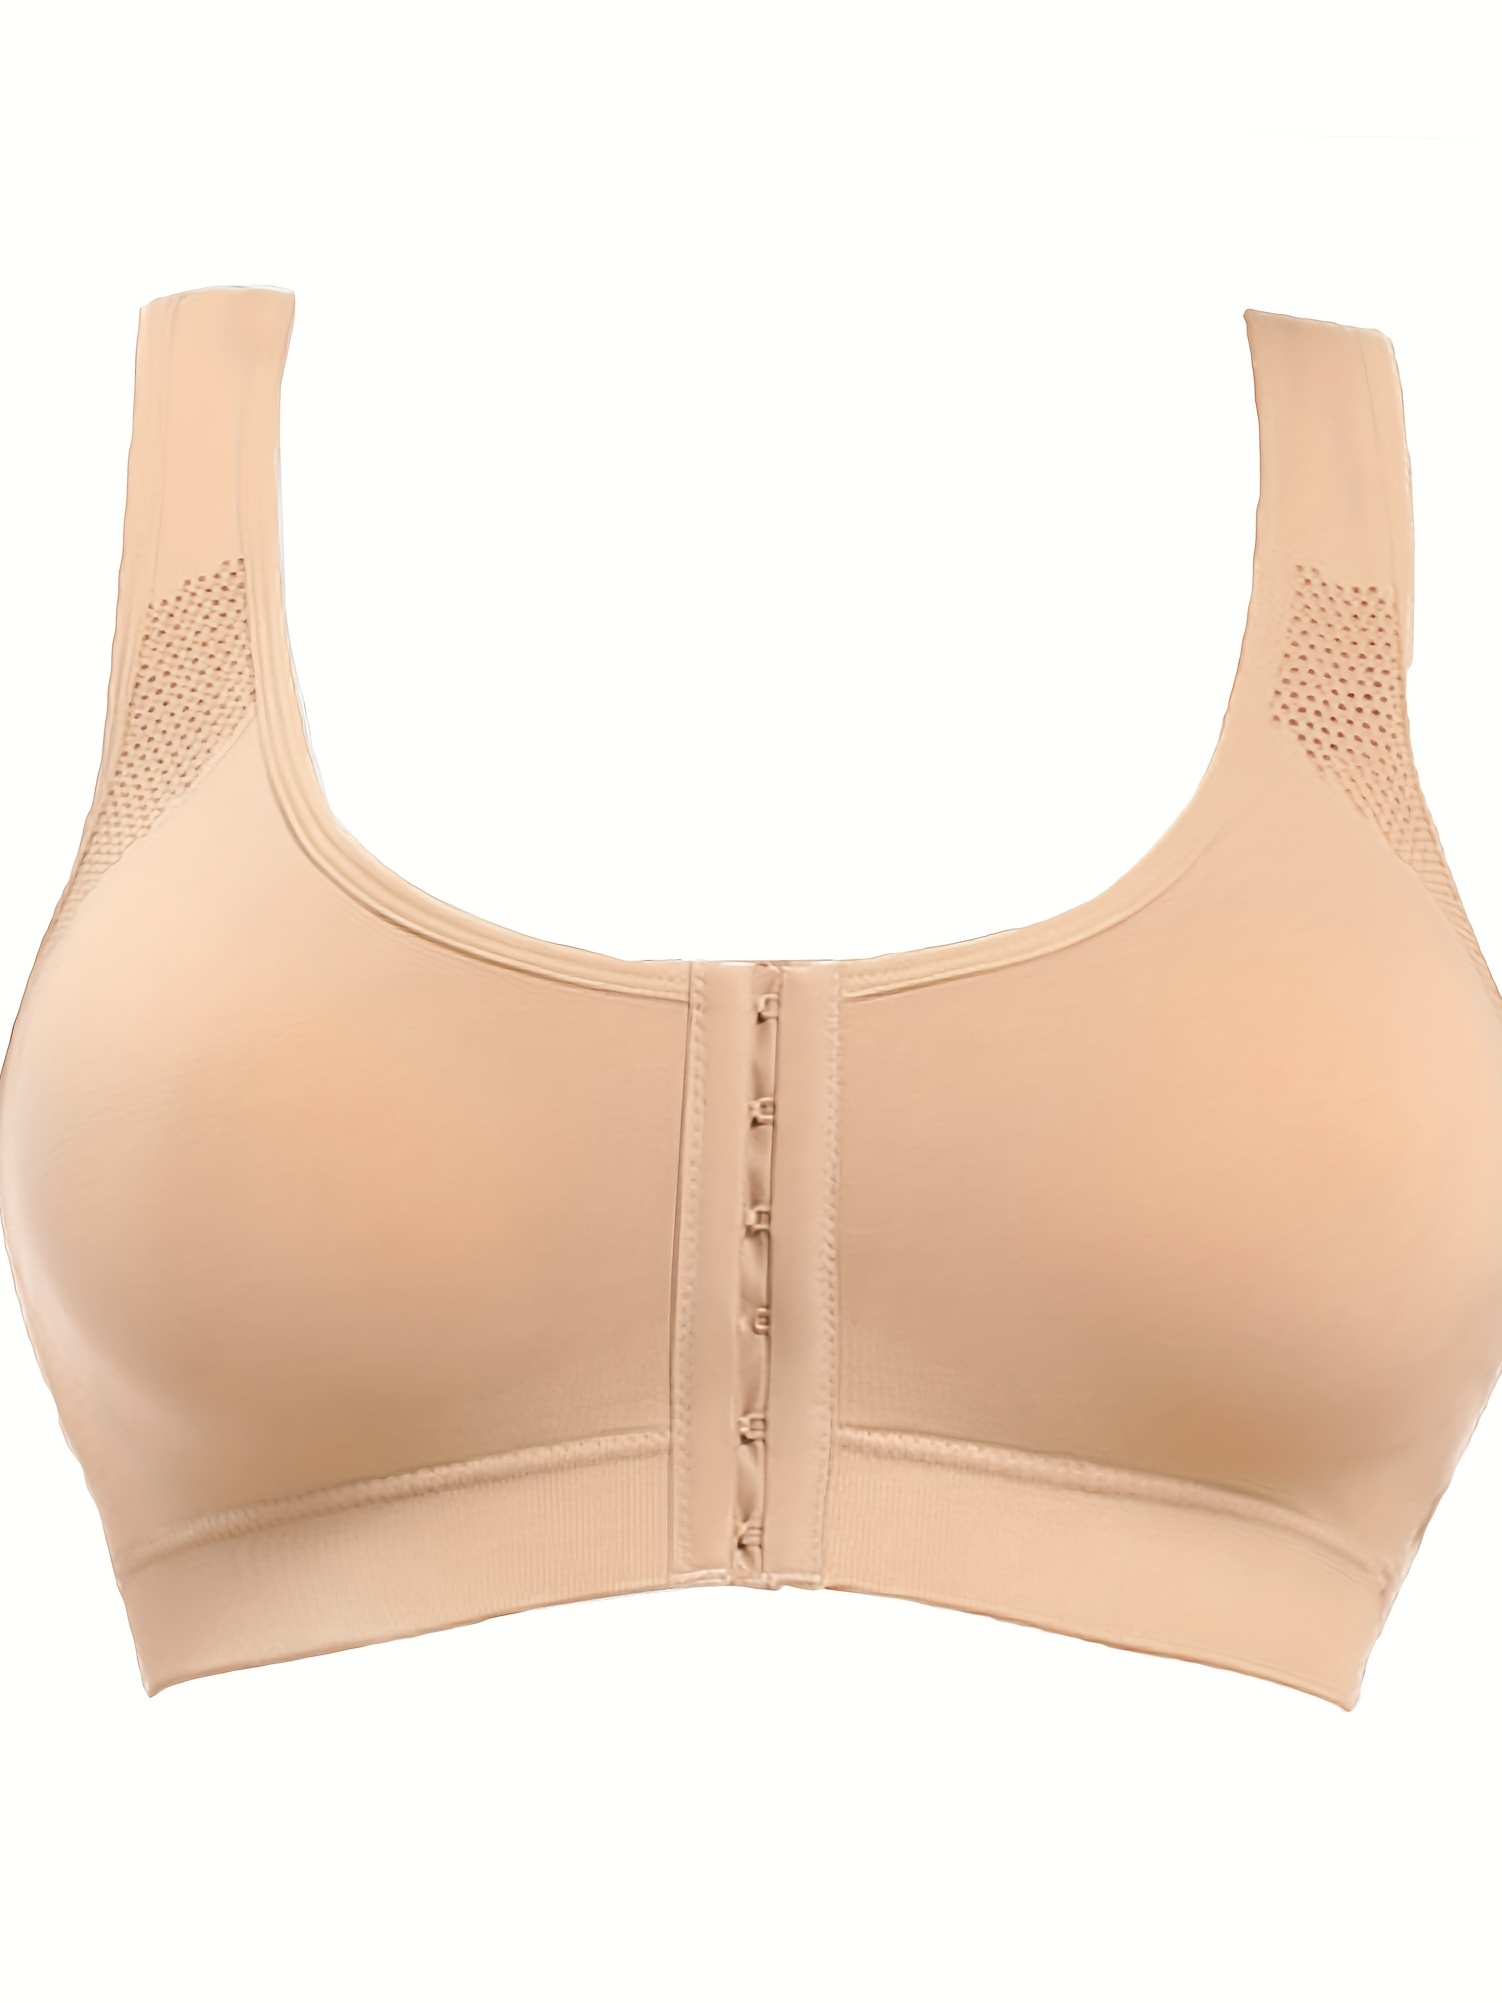 Post Surgical Bra Front Closure Post Surgery Bra Post Op Front